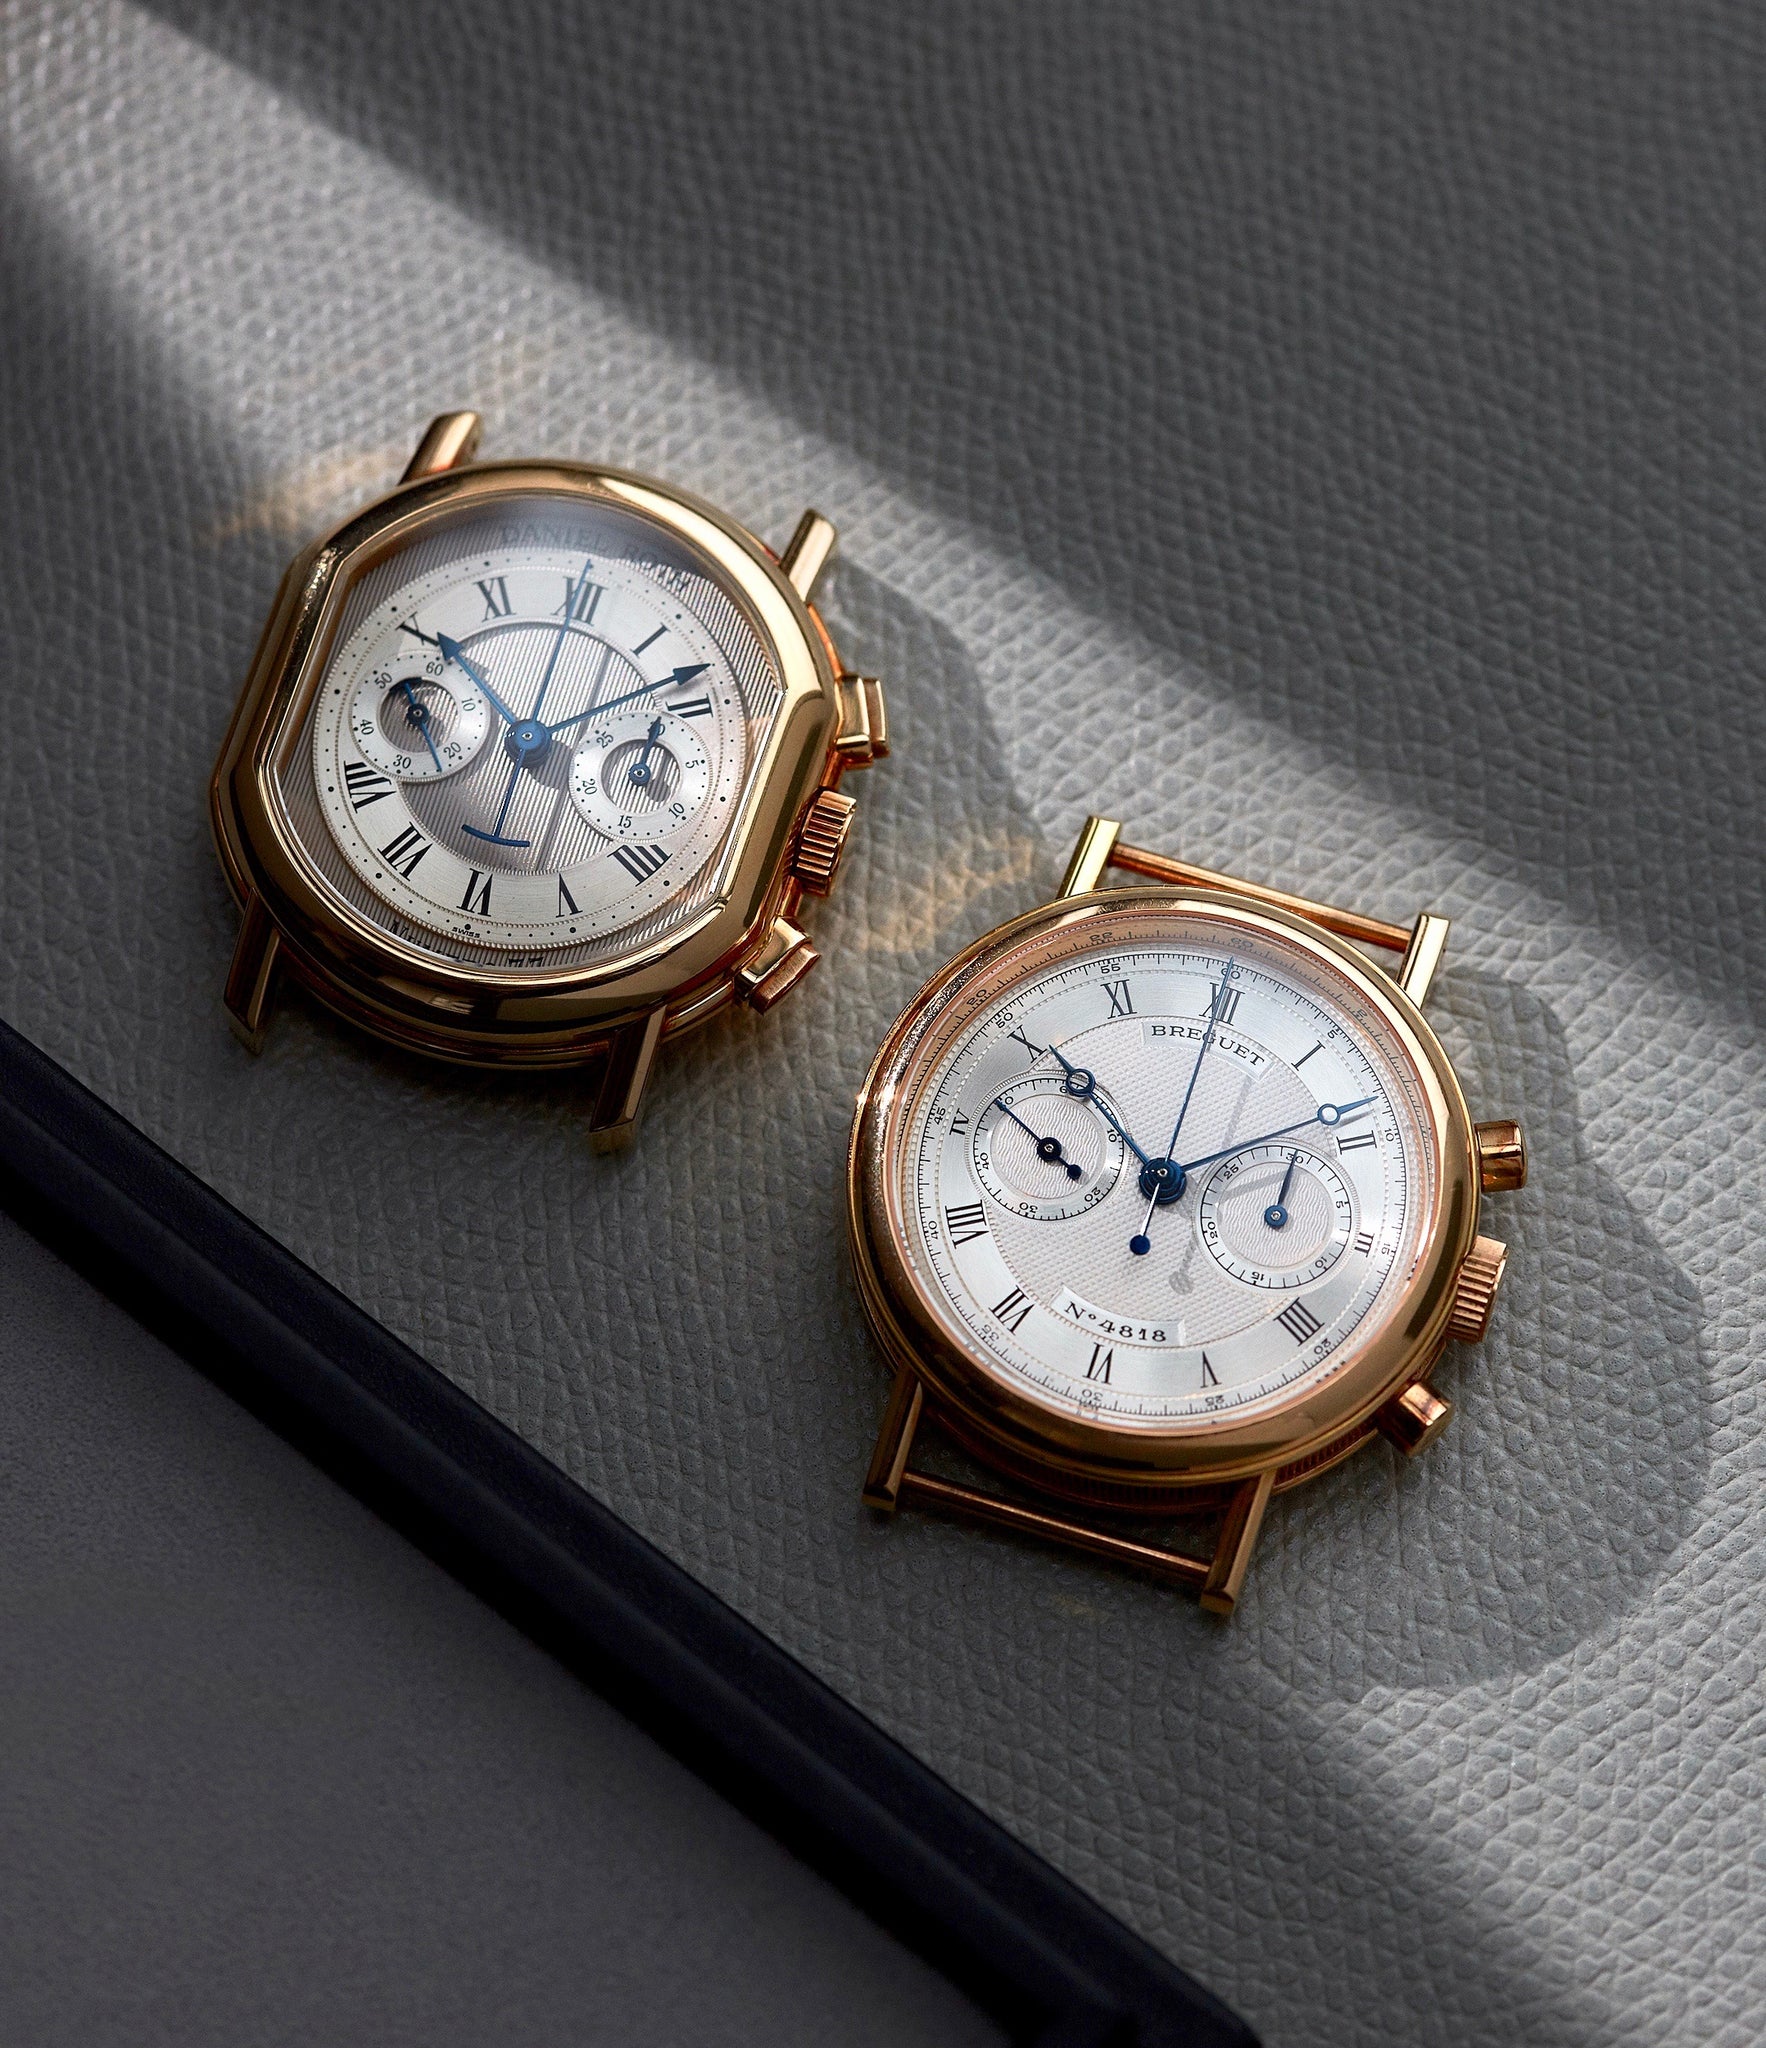 Read A Collected Man Journal Post | One of the earliest pieces created under Roth’s own name, the BB 2147, alongside a Breguet Classique Chronograph 3237, where Roth worked to translate the Breguet aesthetic into wristwatch form